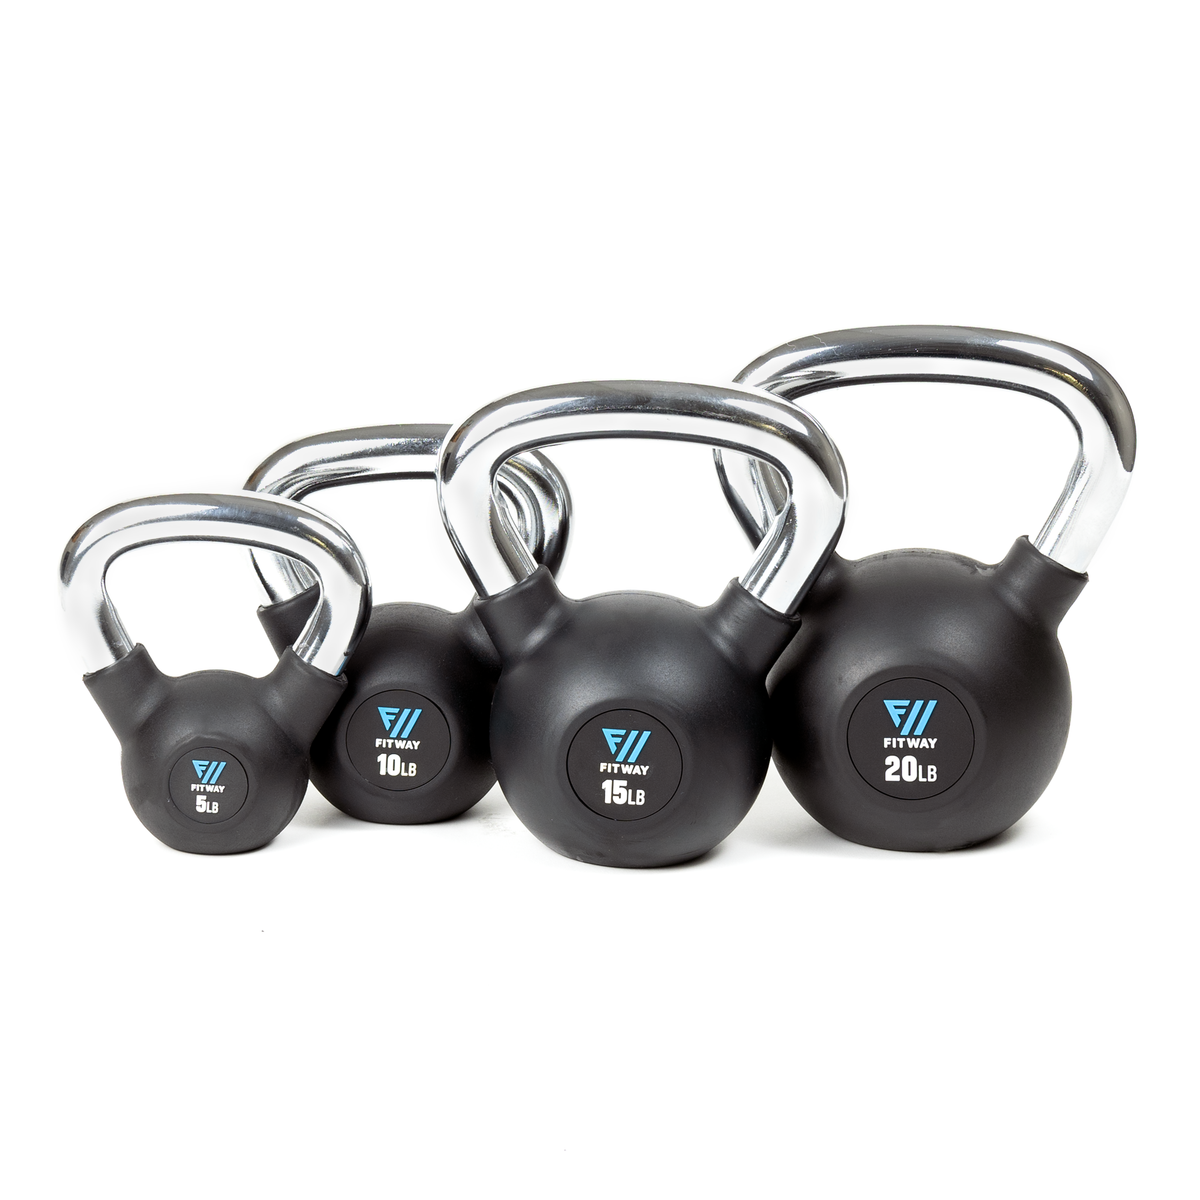 FitWay Equip. Rubber Coated 40lb Kettlebell